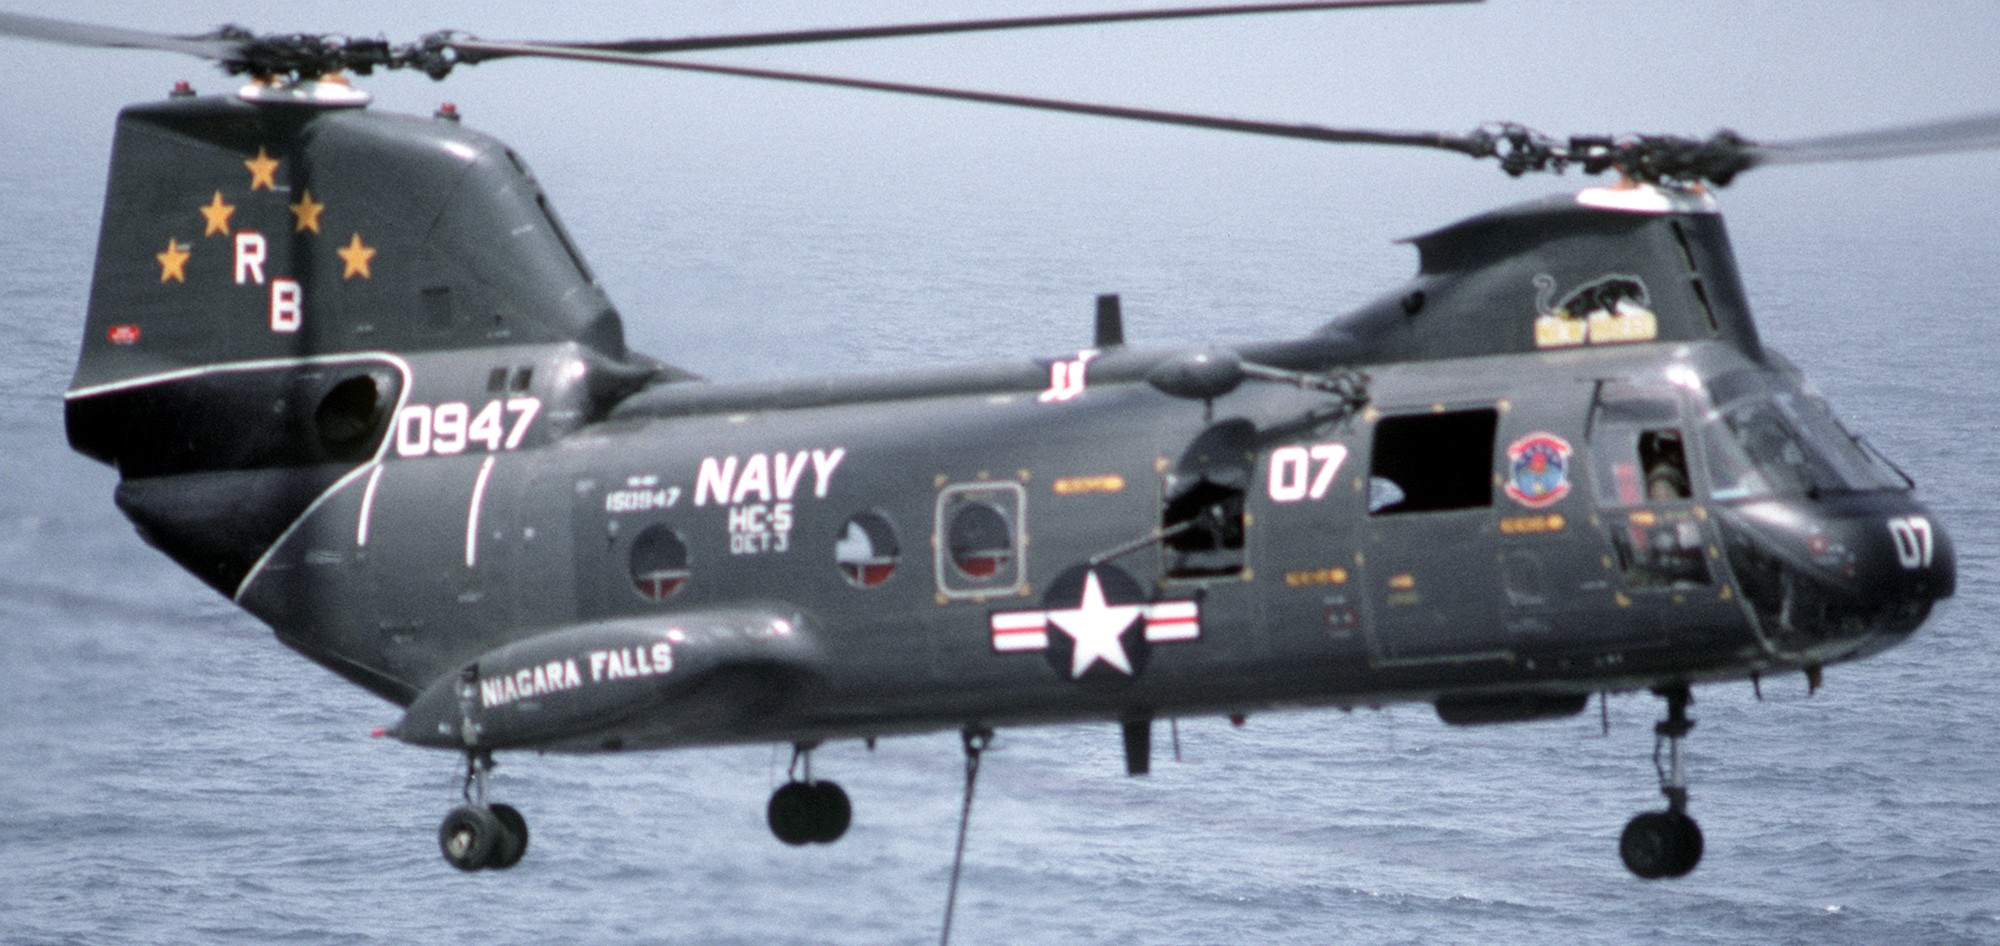 hc-5 providers helicopter combat support squadron navy hh-46 sea knight 54